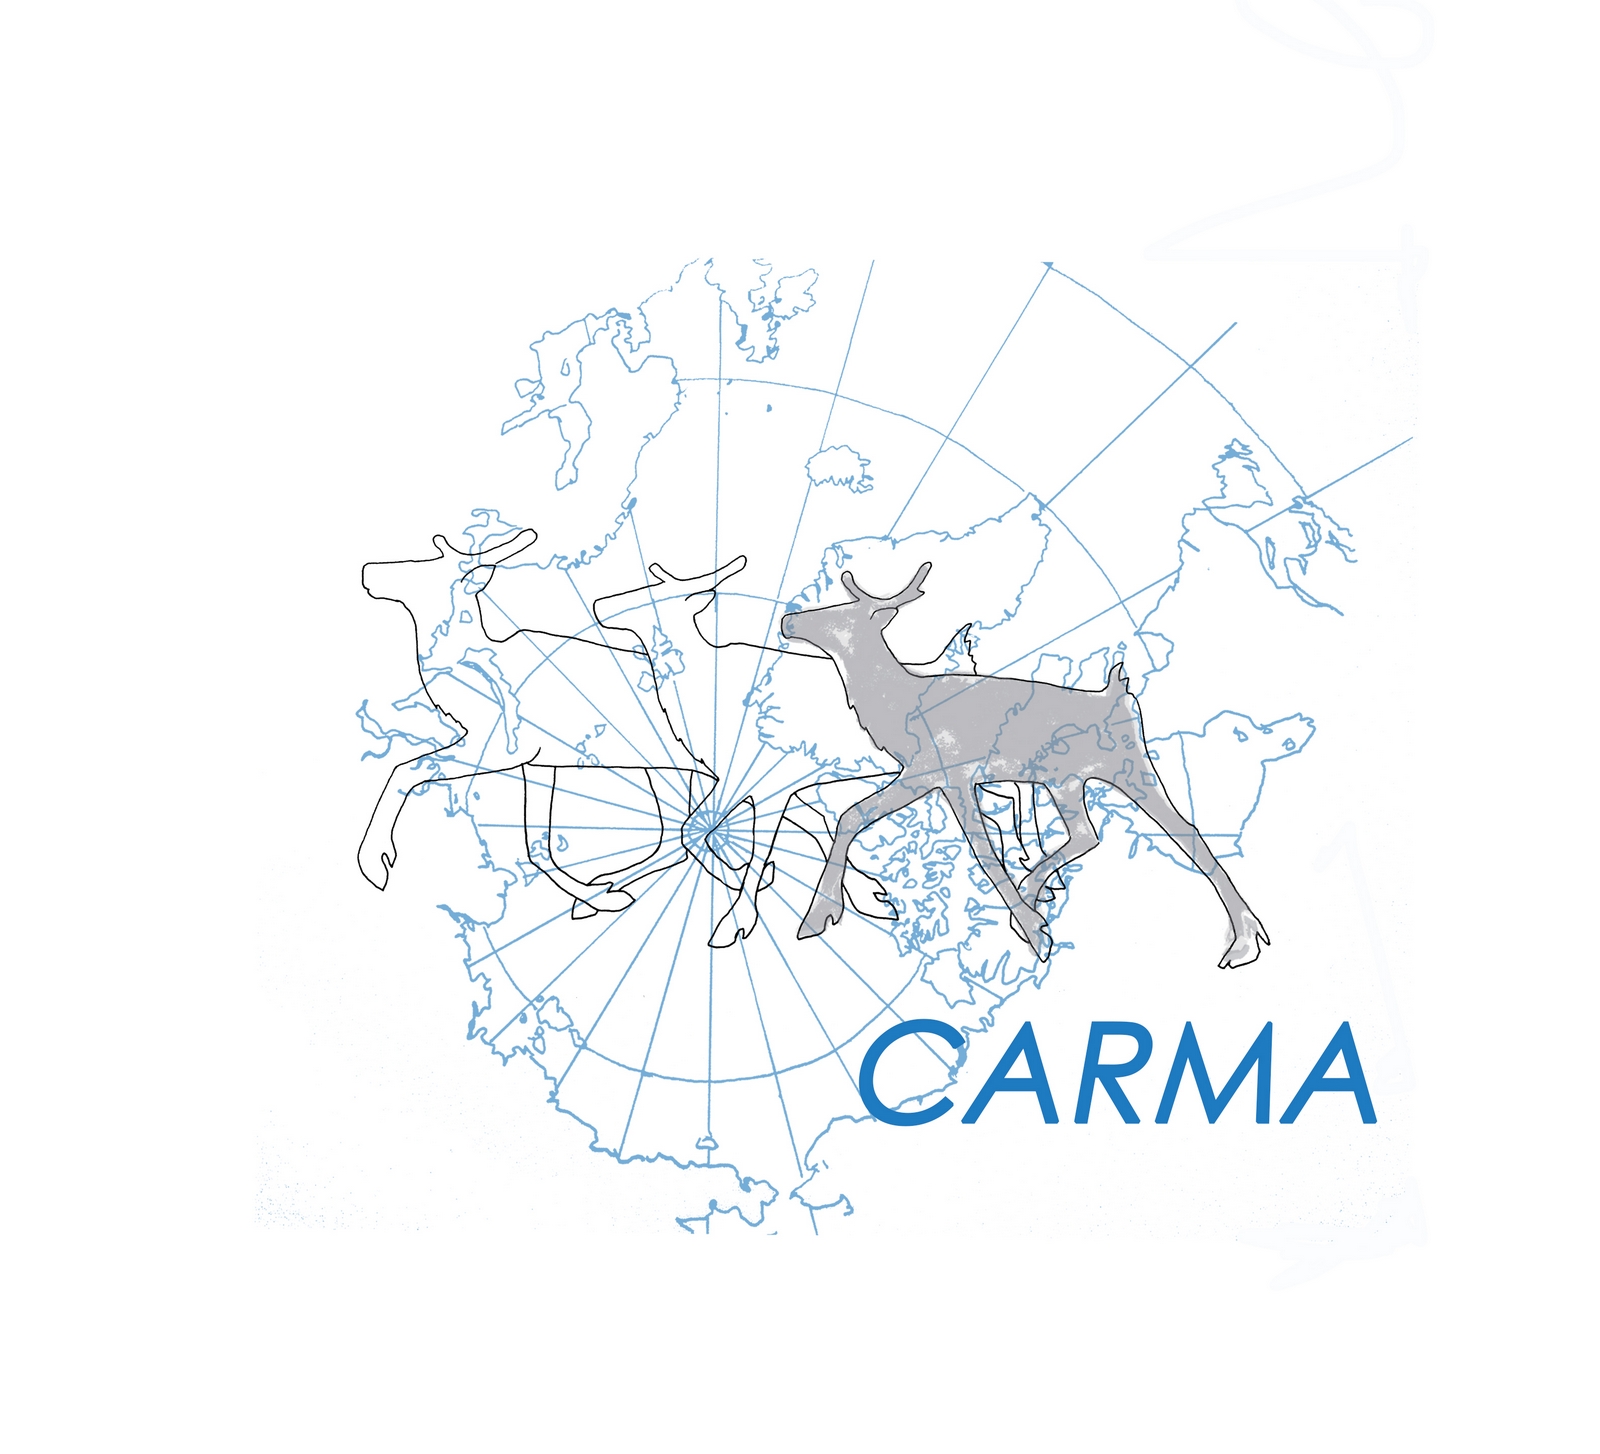 A gridded map of the North Pole and Arctic Regions overlaid with a drawing of three caribou walking, with the initials CARMA below